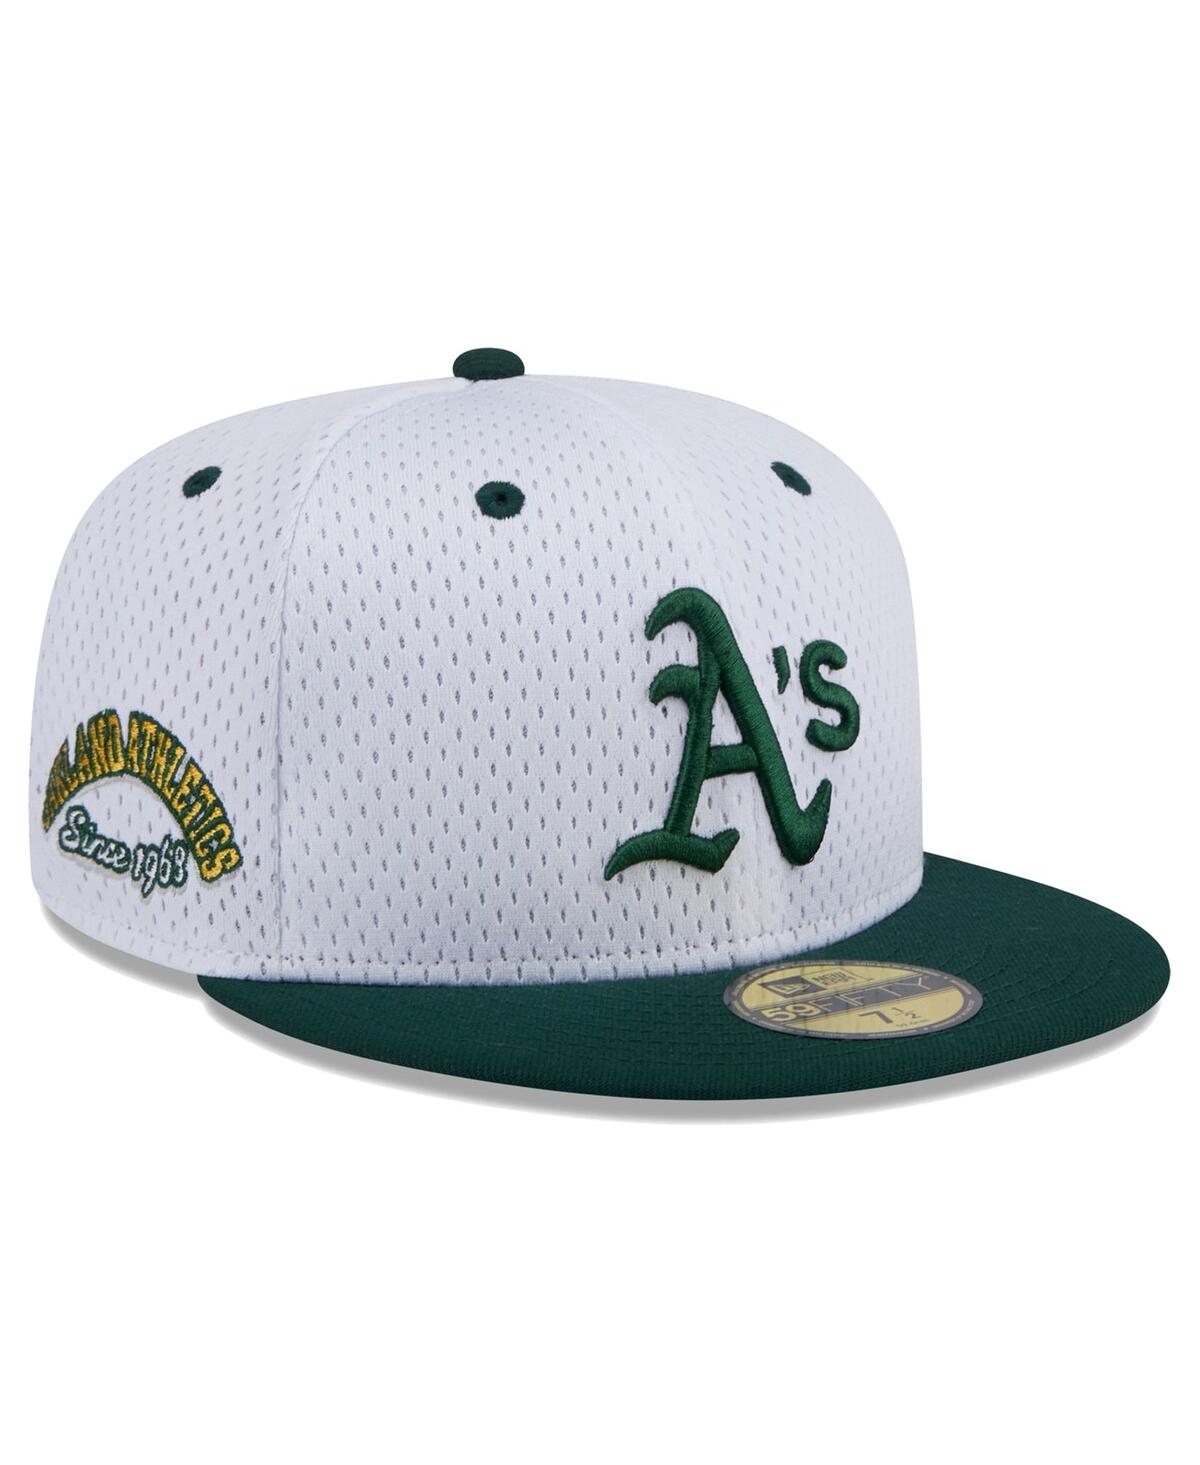 Men's White Oakland Athletics Throwback Mesh 59FIFTY Fitted Hat - White, Green